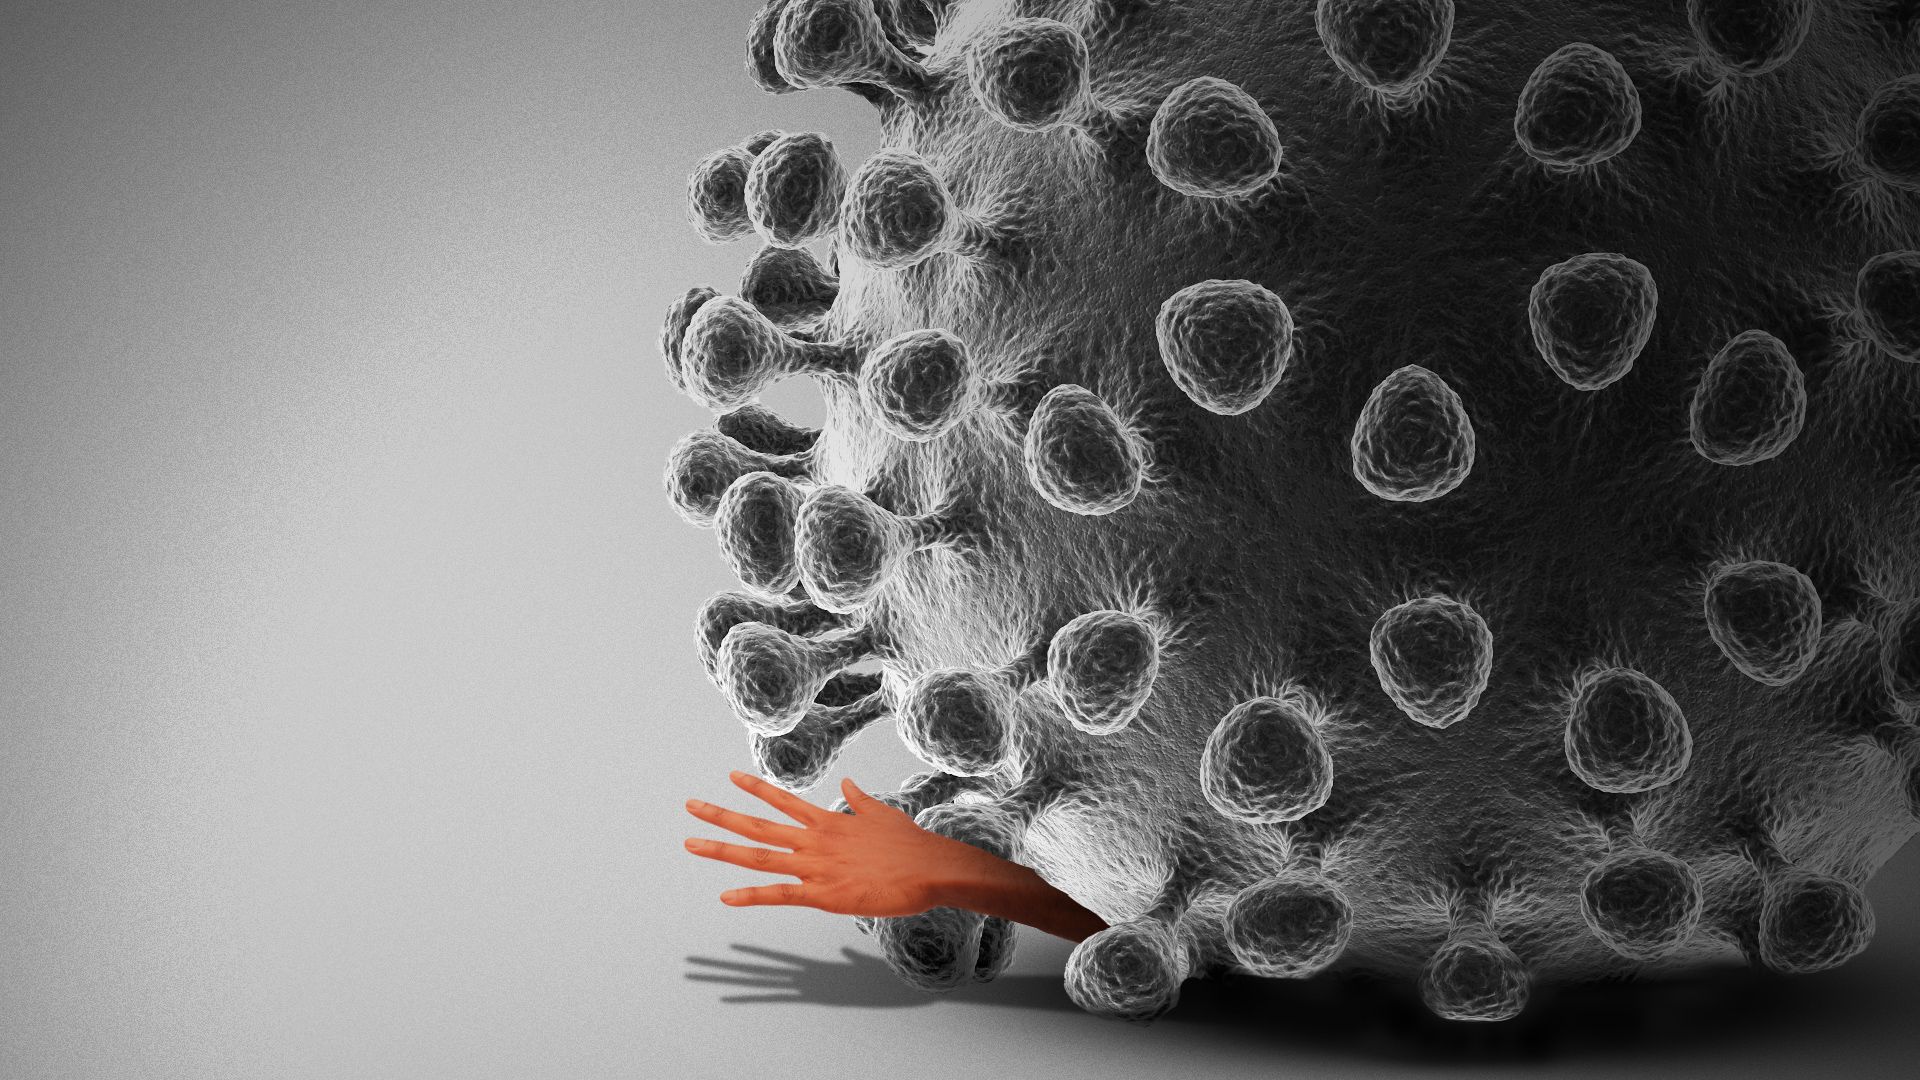 Illustration of a hand reaching out for help from under a giant virus cell.